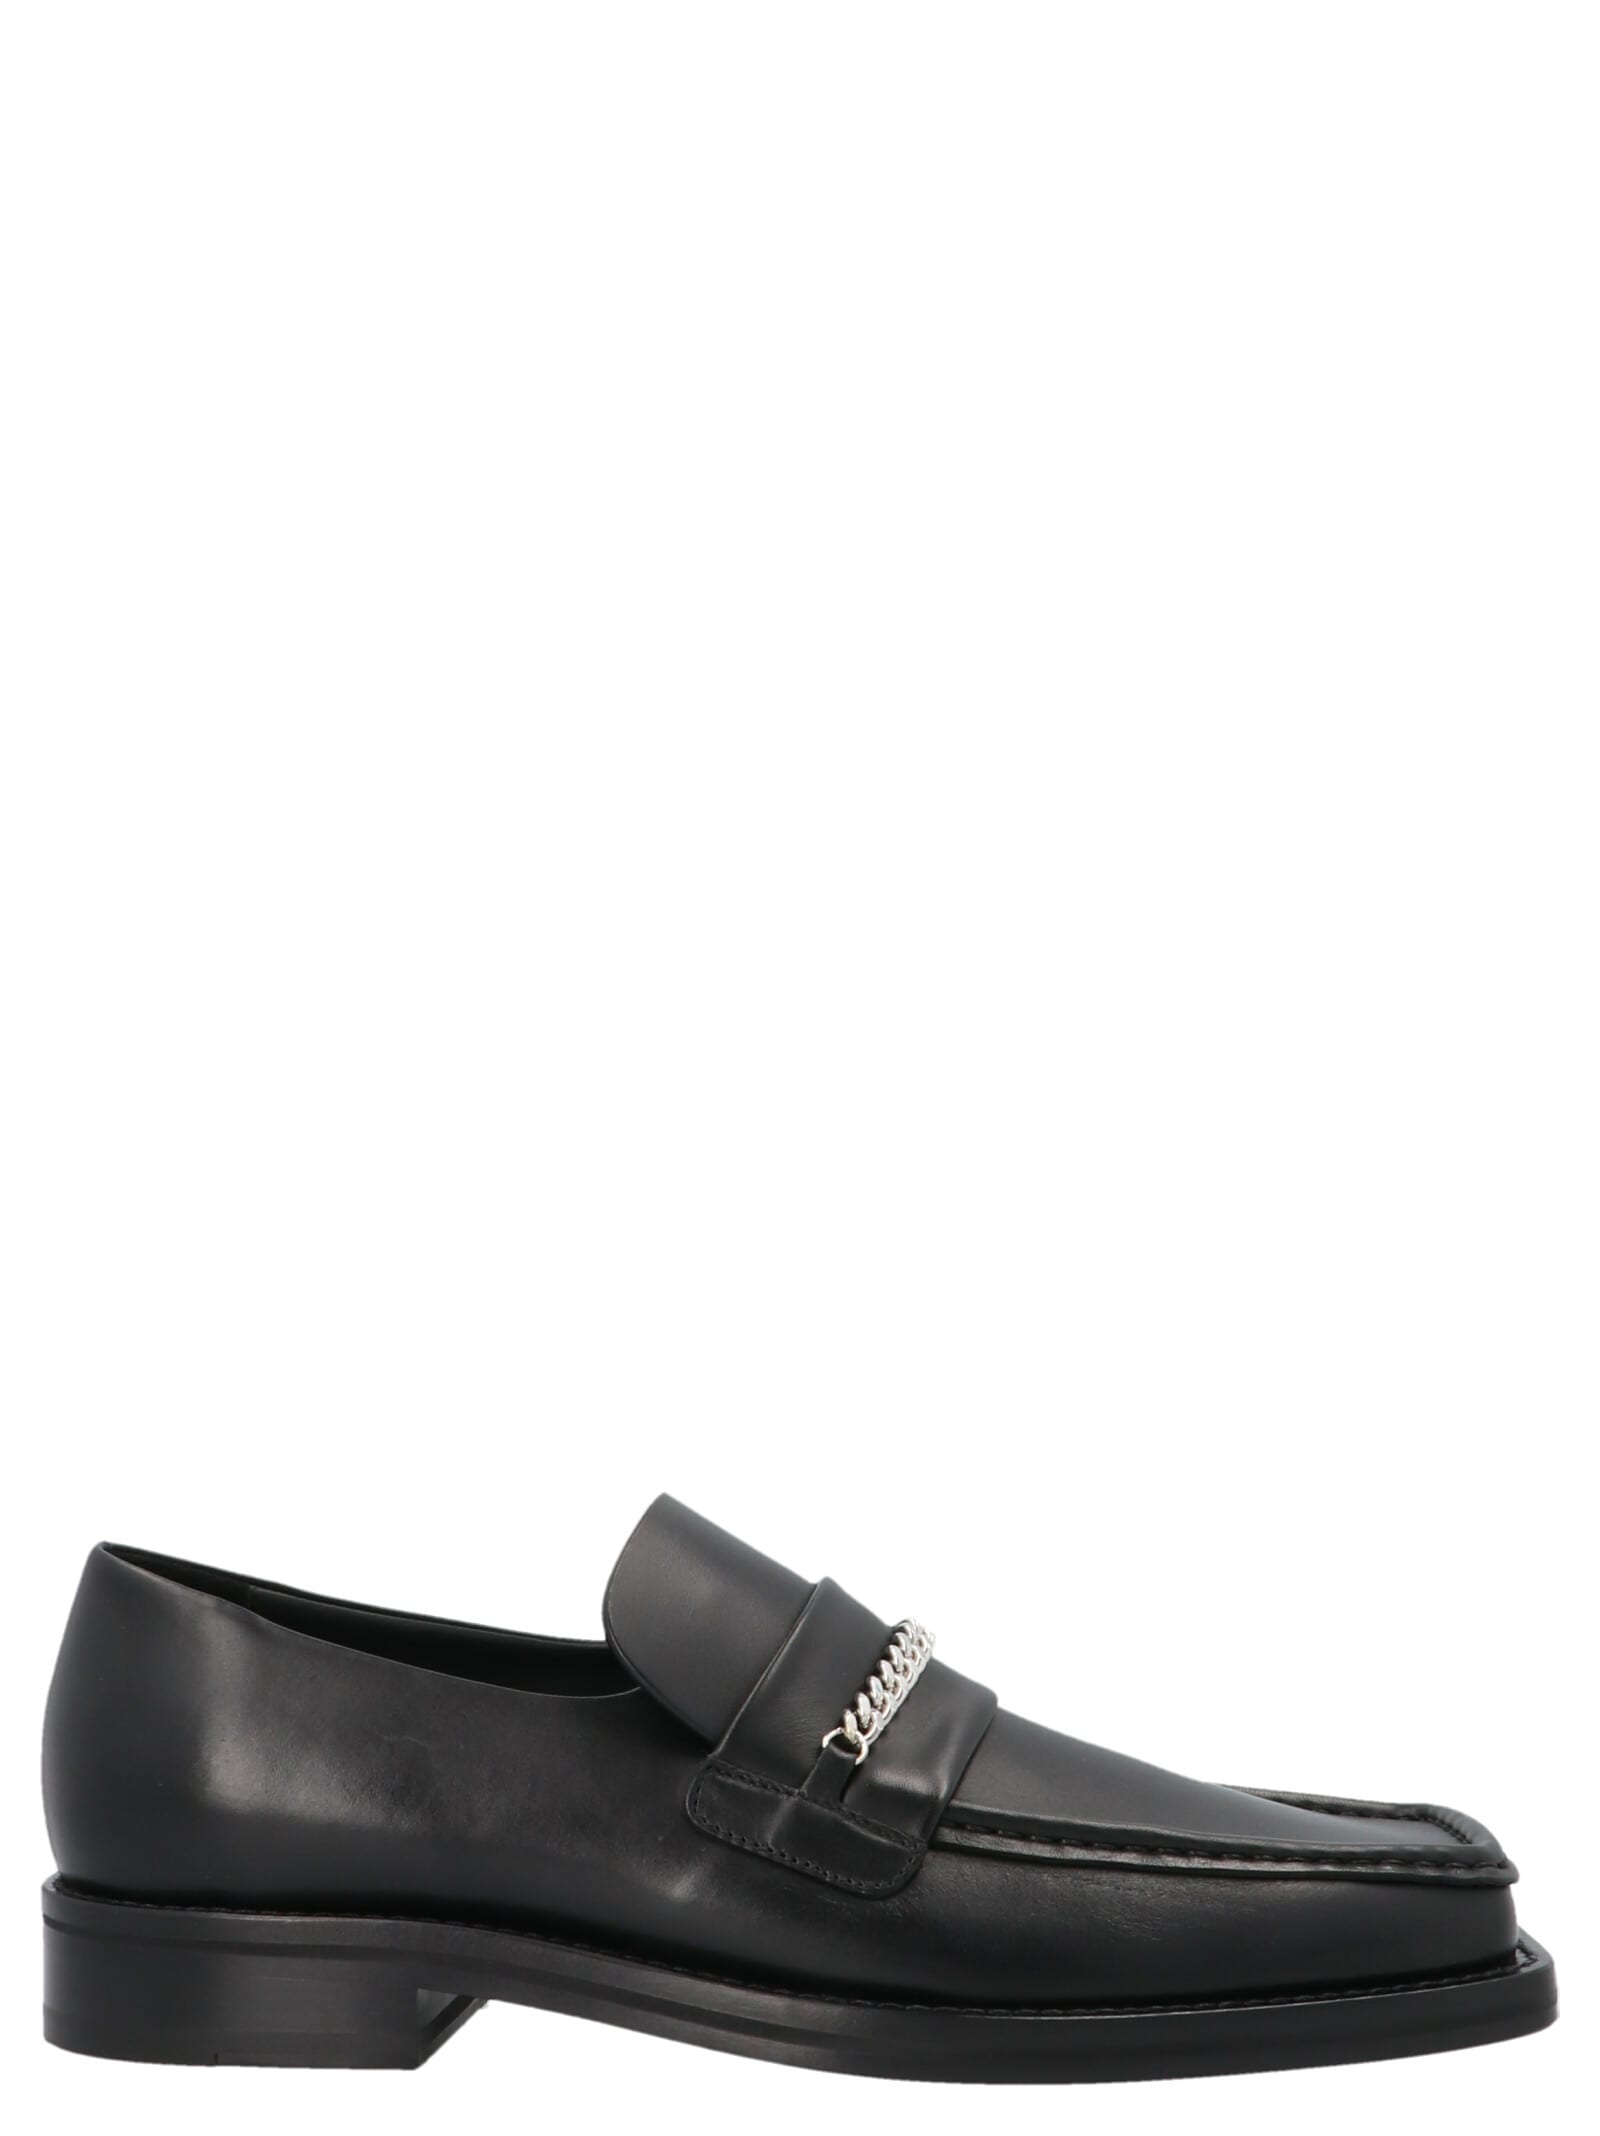 Martine Rose Pointed Toe Loafers